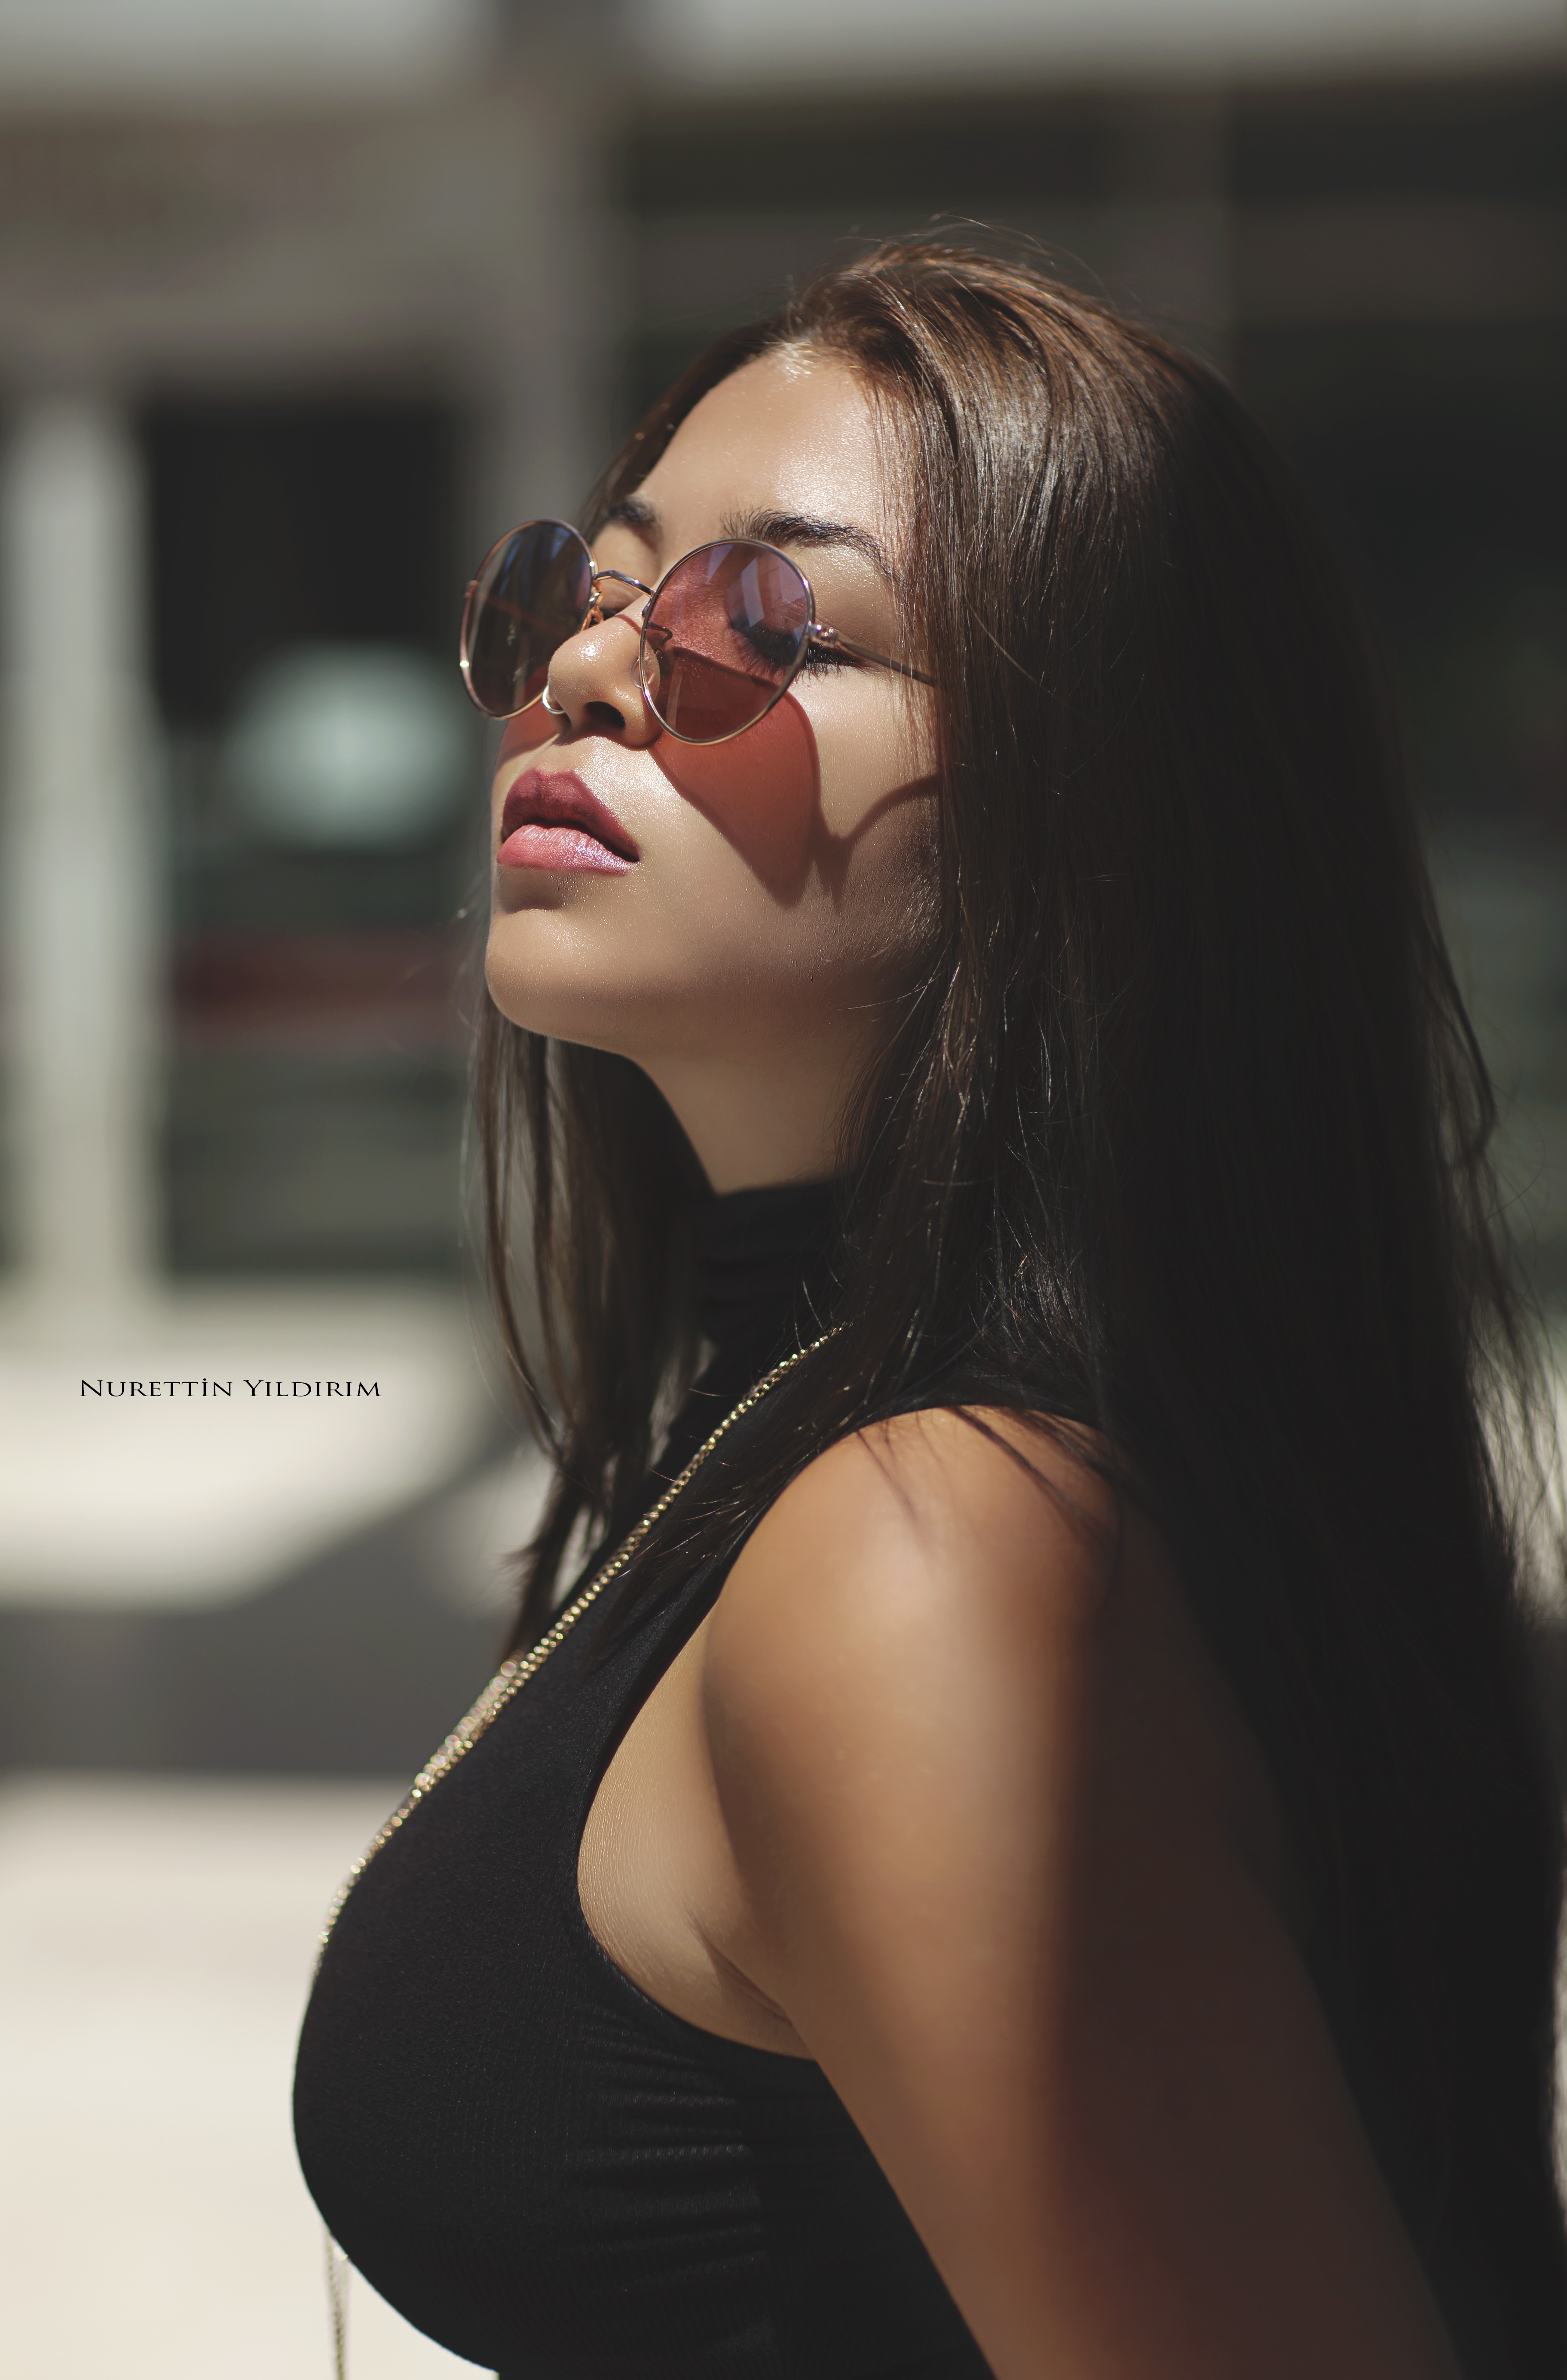 Fashion Portrait Girls Aloud Canon Tanned Brunette Sunglasses Women With Shades 3646x5539